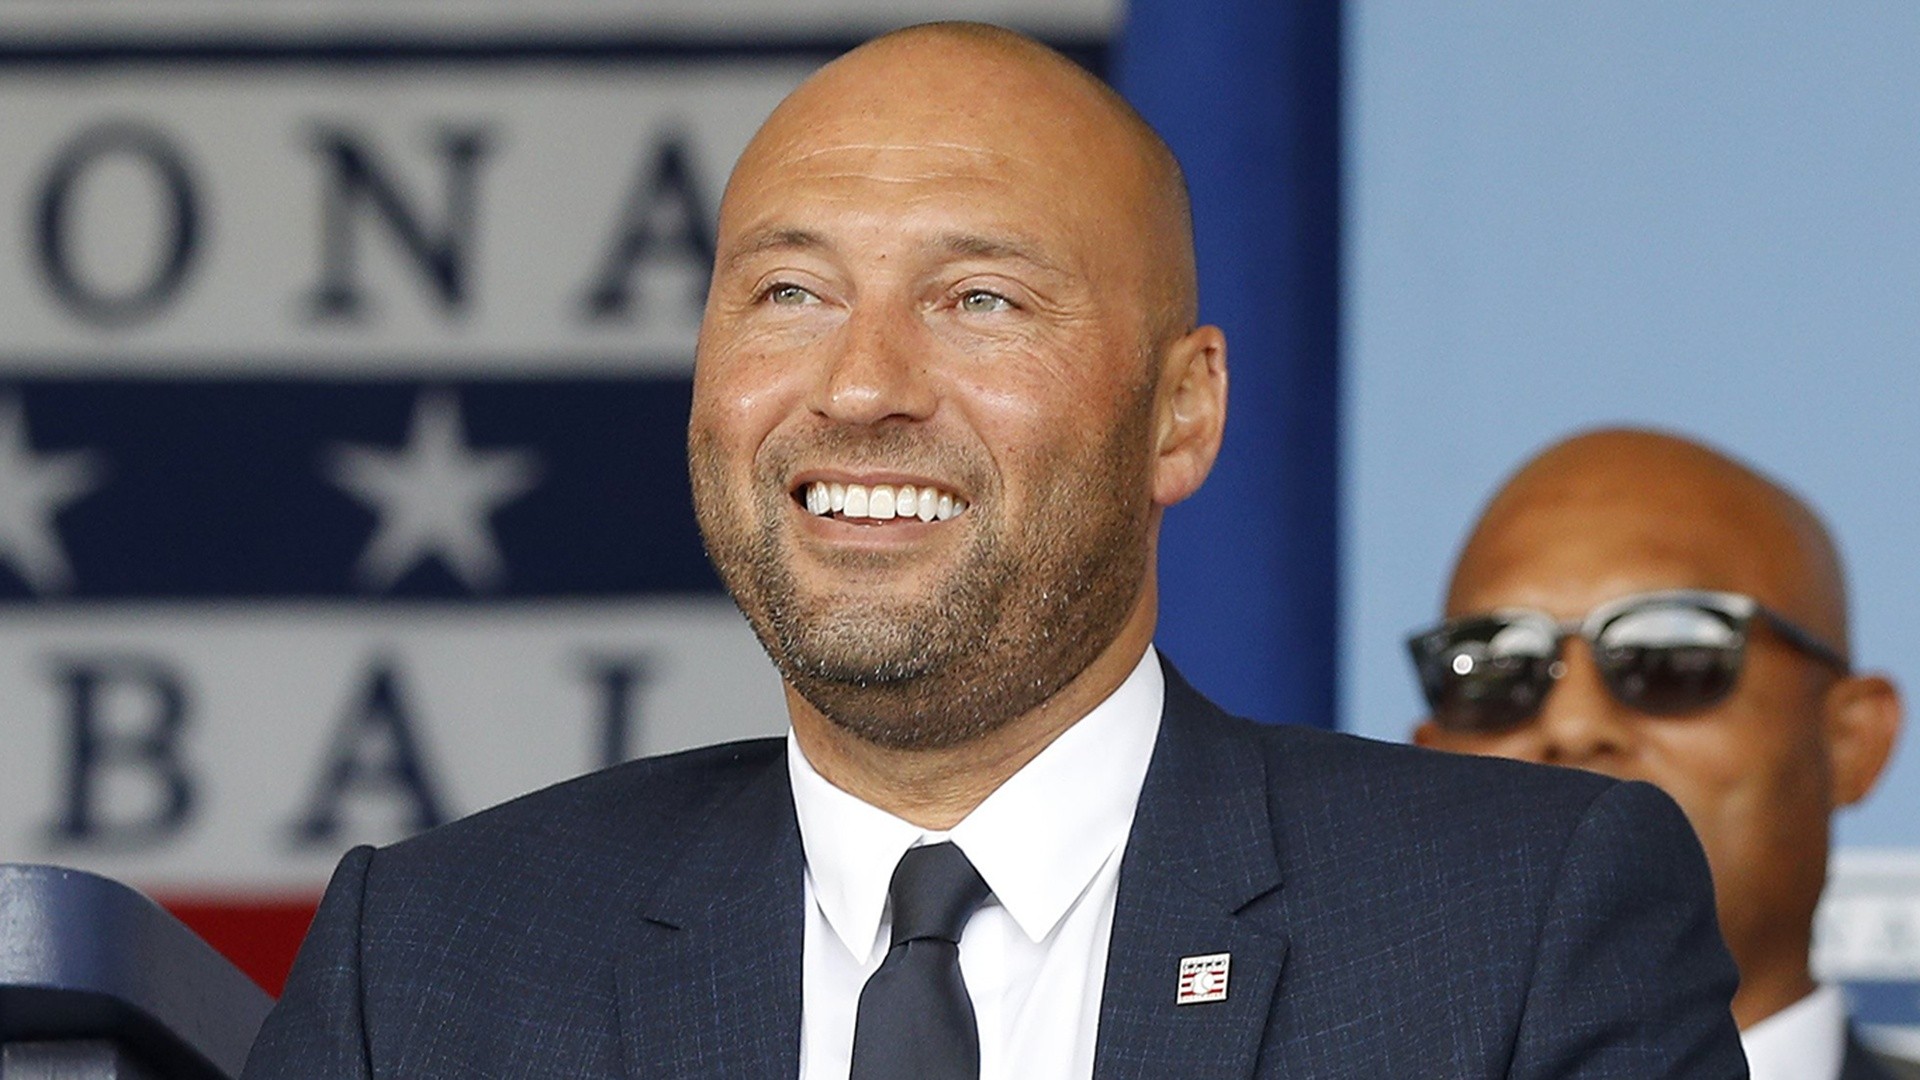 Derek Jeter's office has two iPads and a lot of hand sanitzer. I